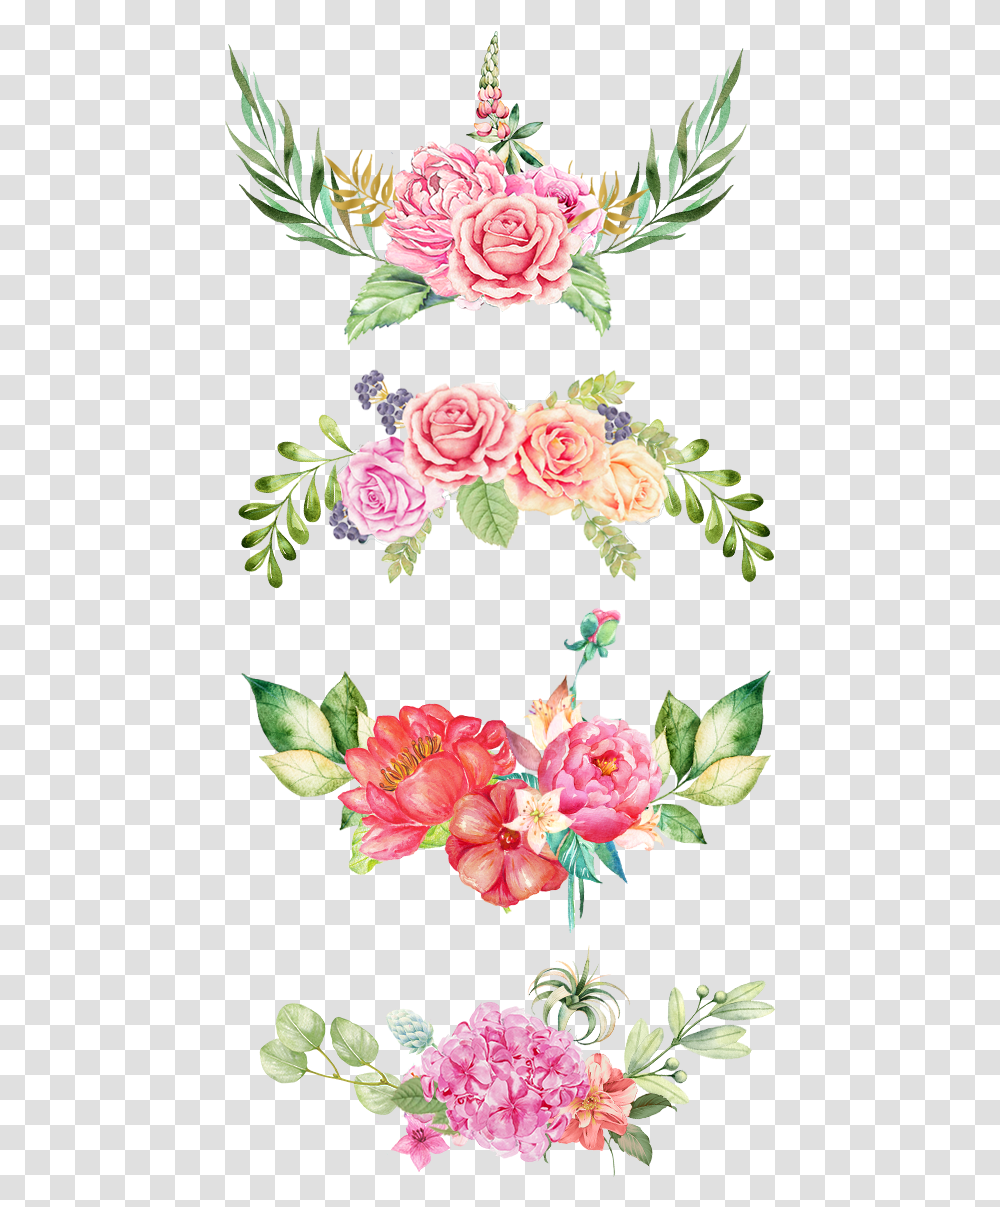 Bathroom Watercolor Flowers In Flower Images Pictures, Plant, Blossom, Floral Design, Pattern Transparent Png